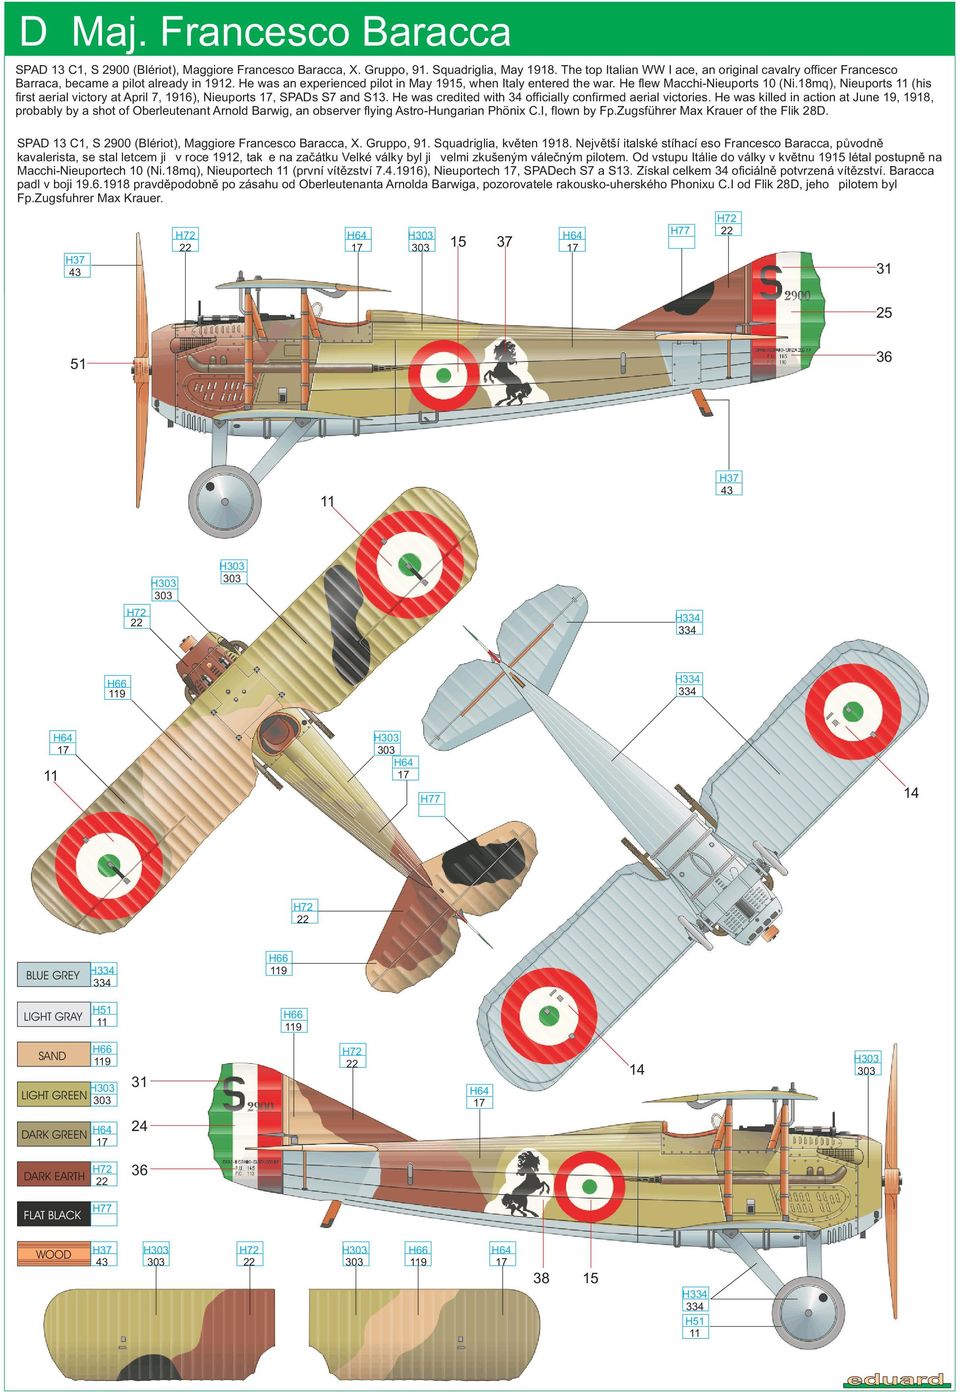 18mq), Nieuports (his first aerial victory at April 7, 1916), Nieuports, SPADs S7 and S13. He was credited with 34 officially confirmed aerial victories.